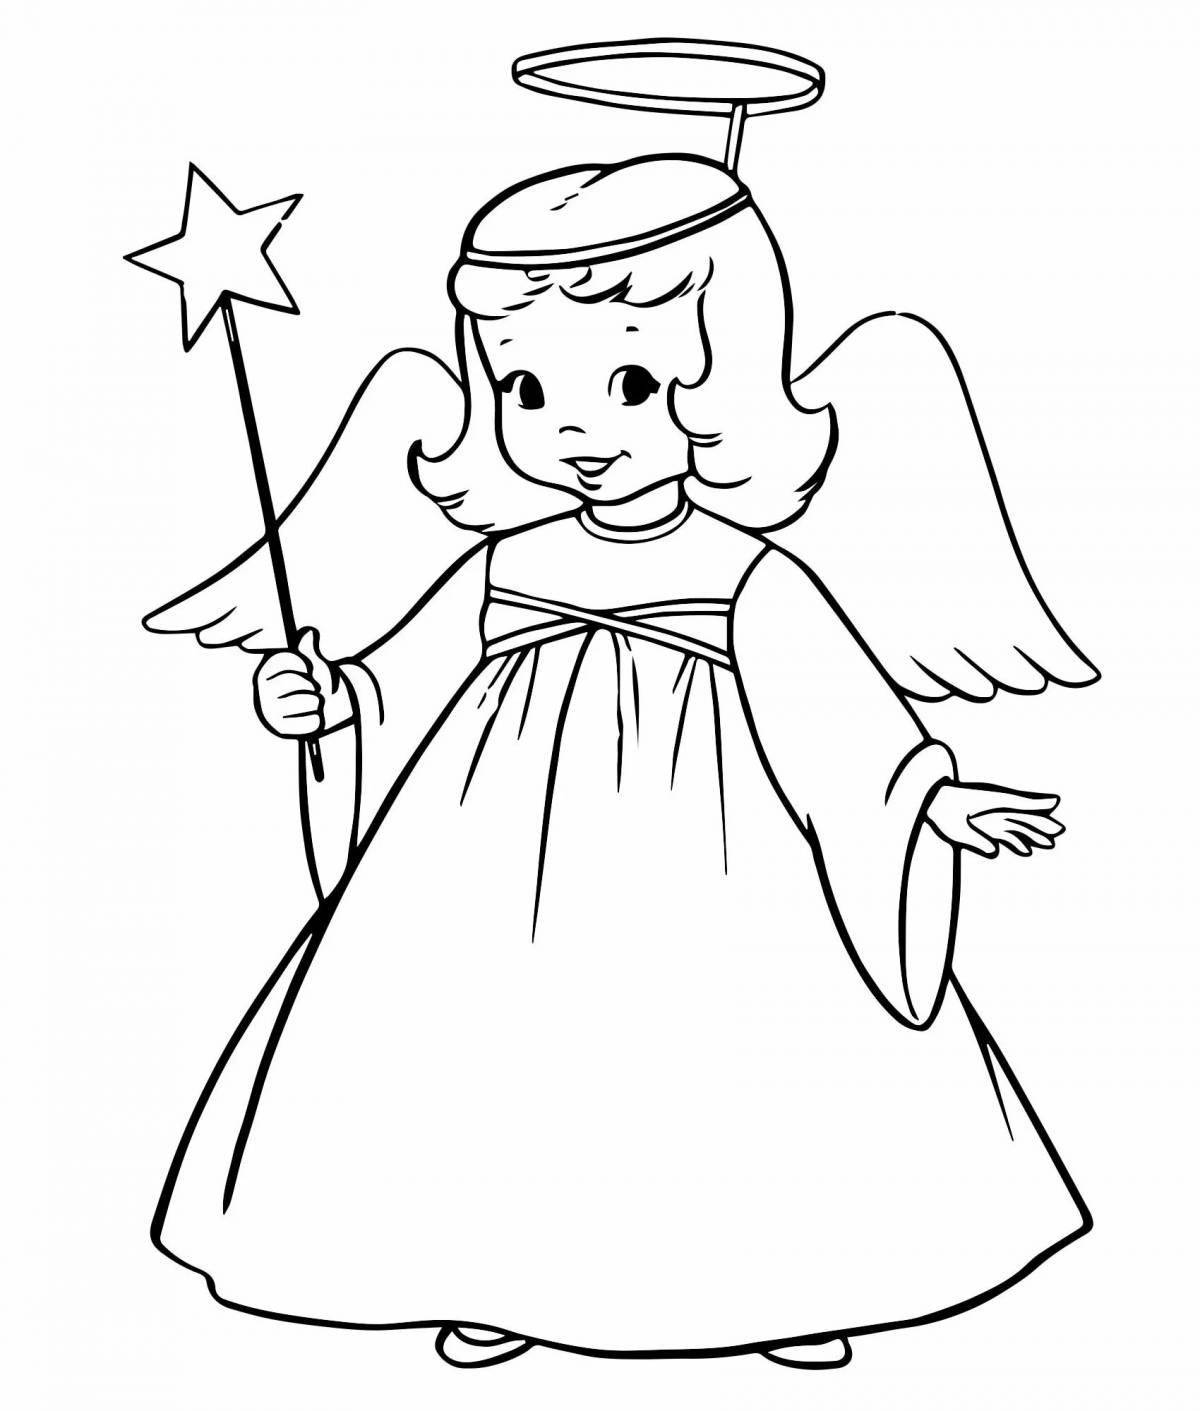 Coloring book angel for children guided by heaven